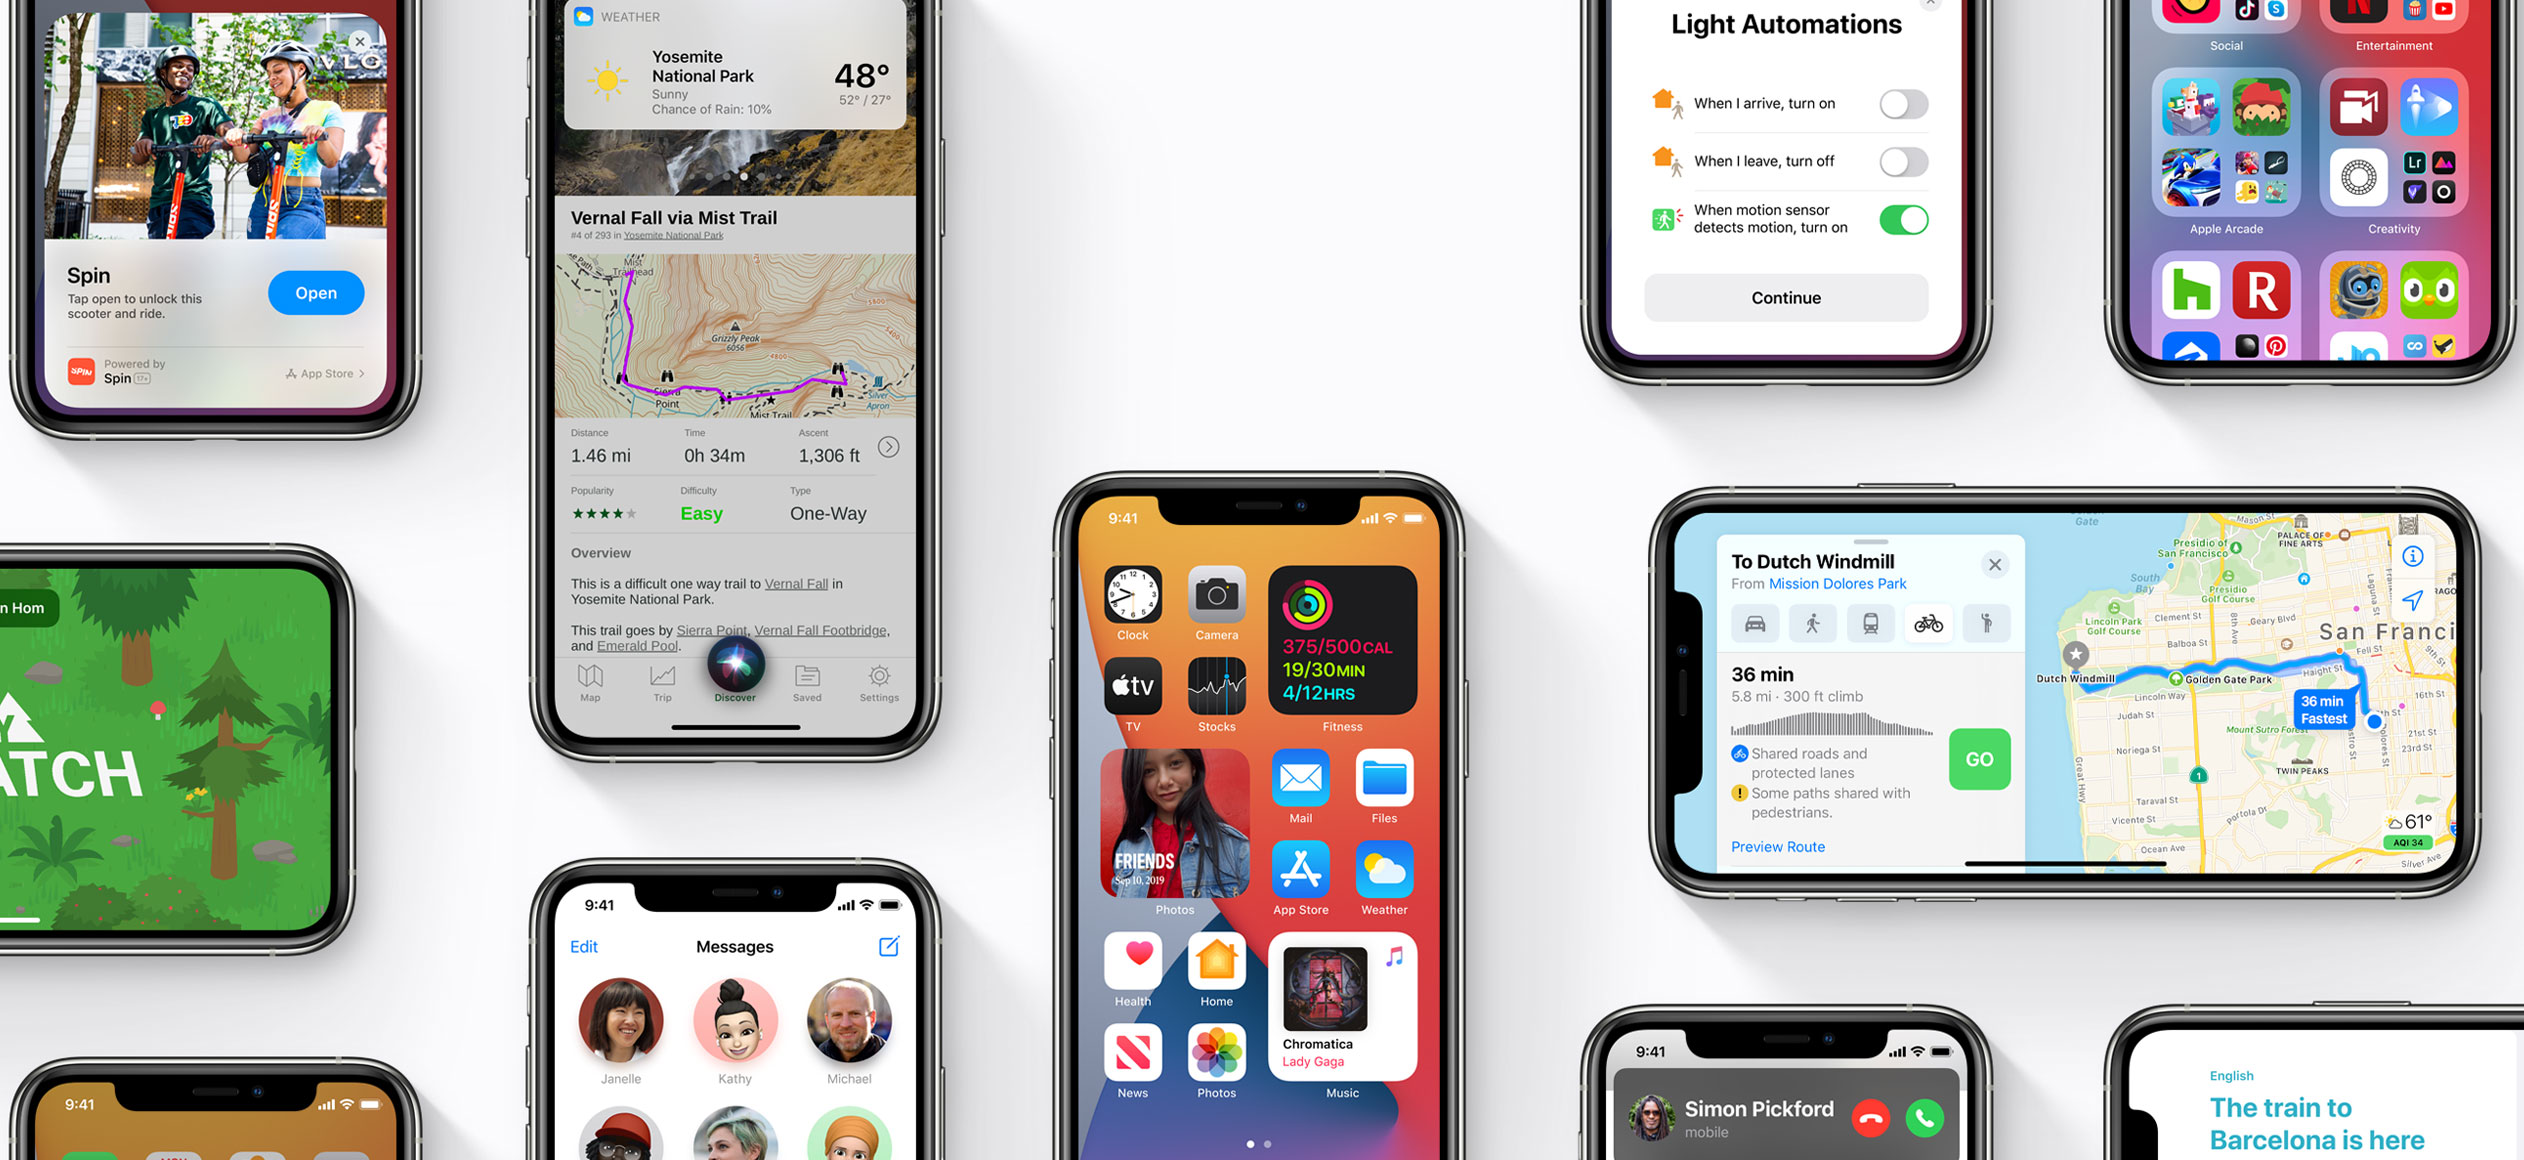 iOS 14 – New features announced at WWDC 2020